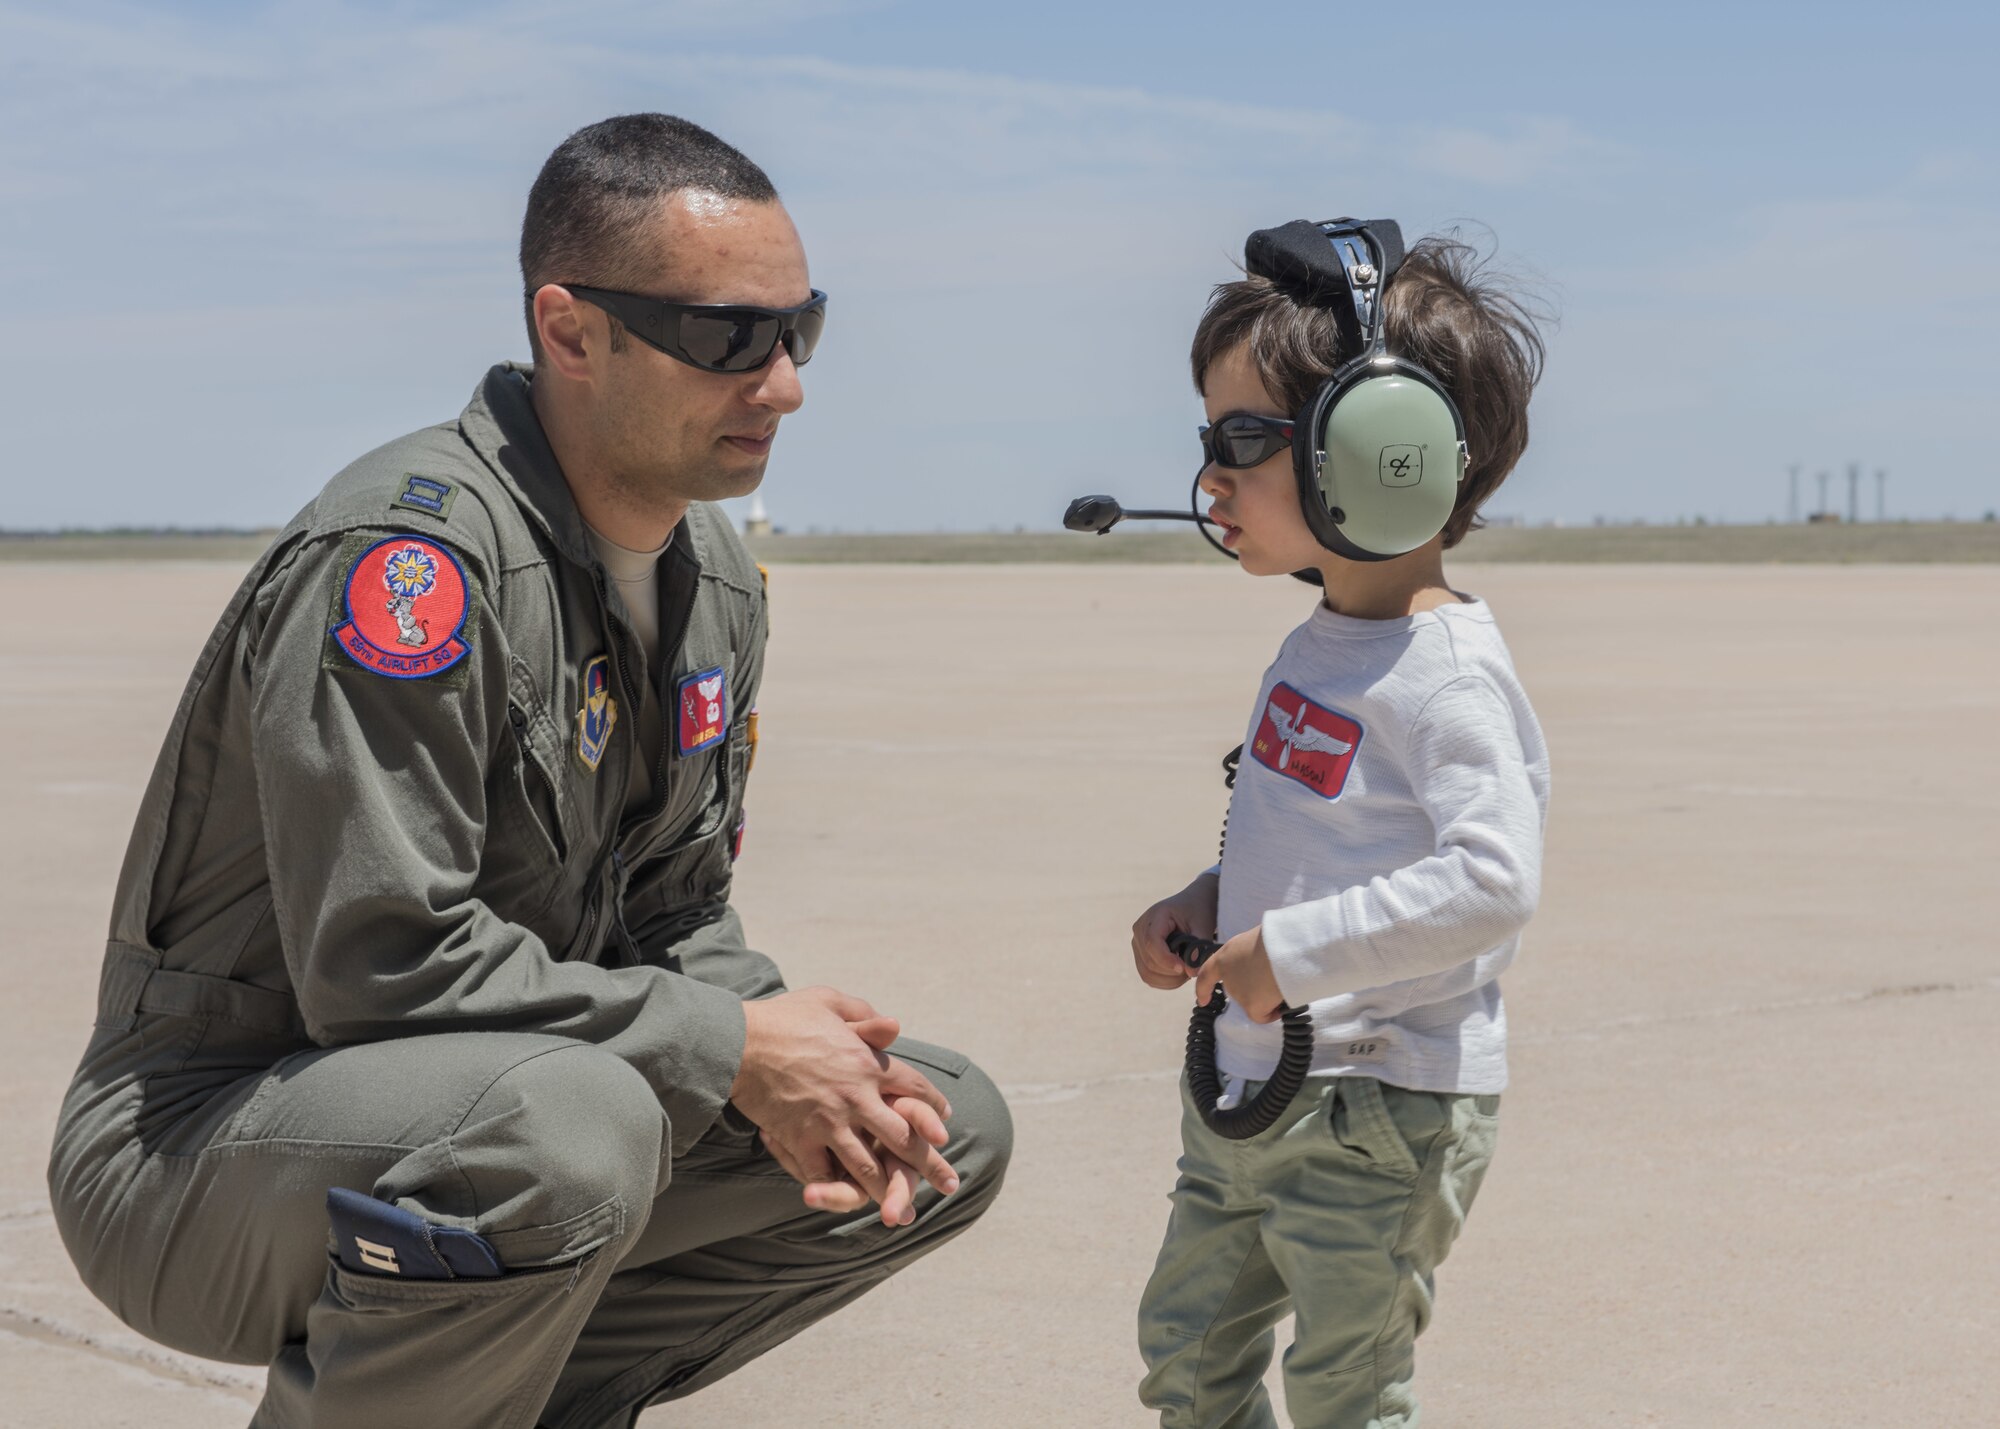 U.S. Air Force Capt. Liam Stein, the chief of student training assigned to the 58th Airlift Squadron, lets his son try on his headset, April 26, 2018, at Altus Air Force Base, Okla.